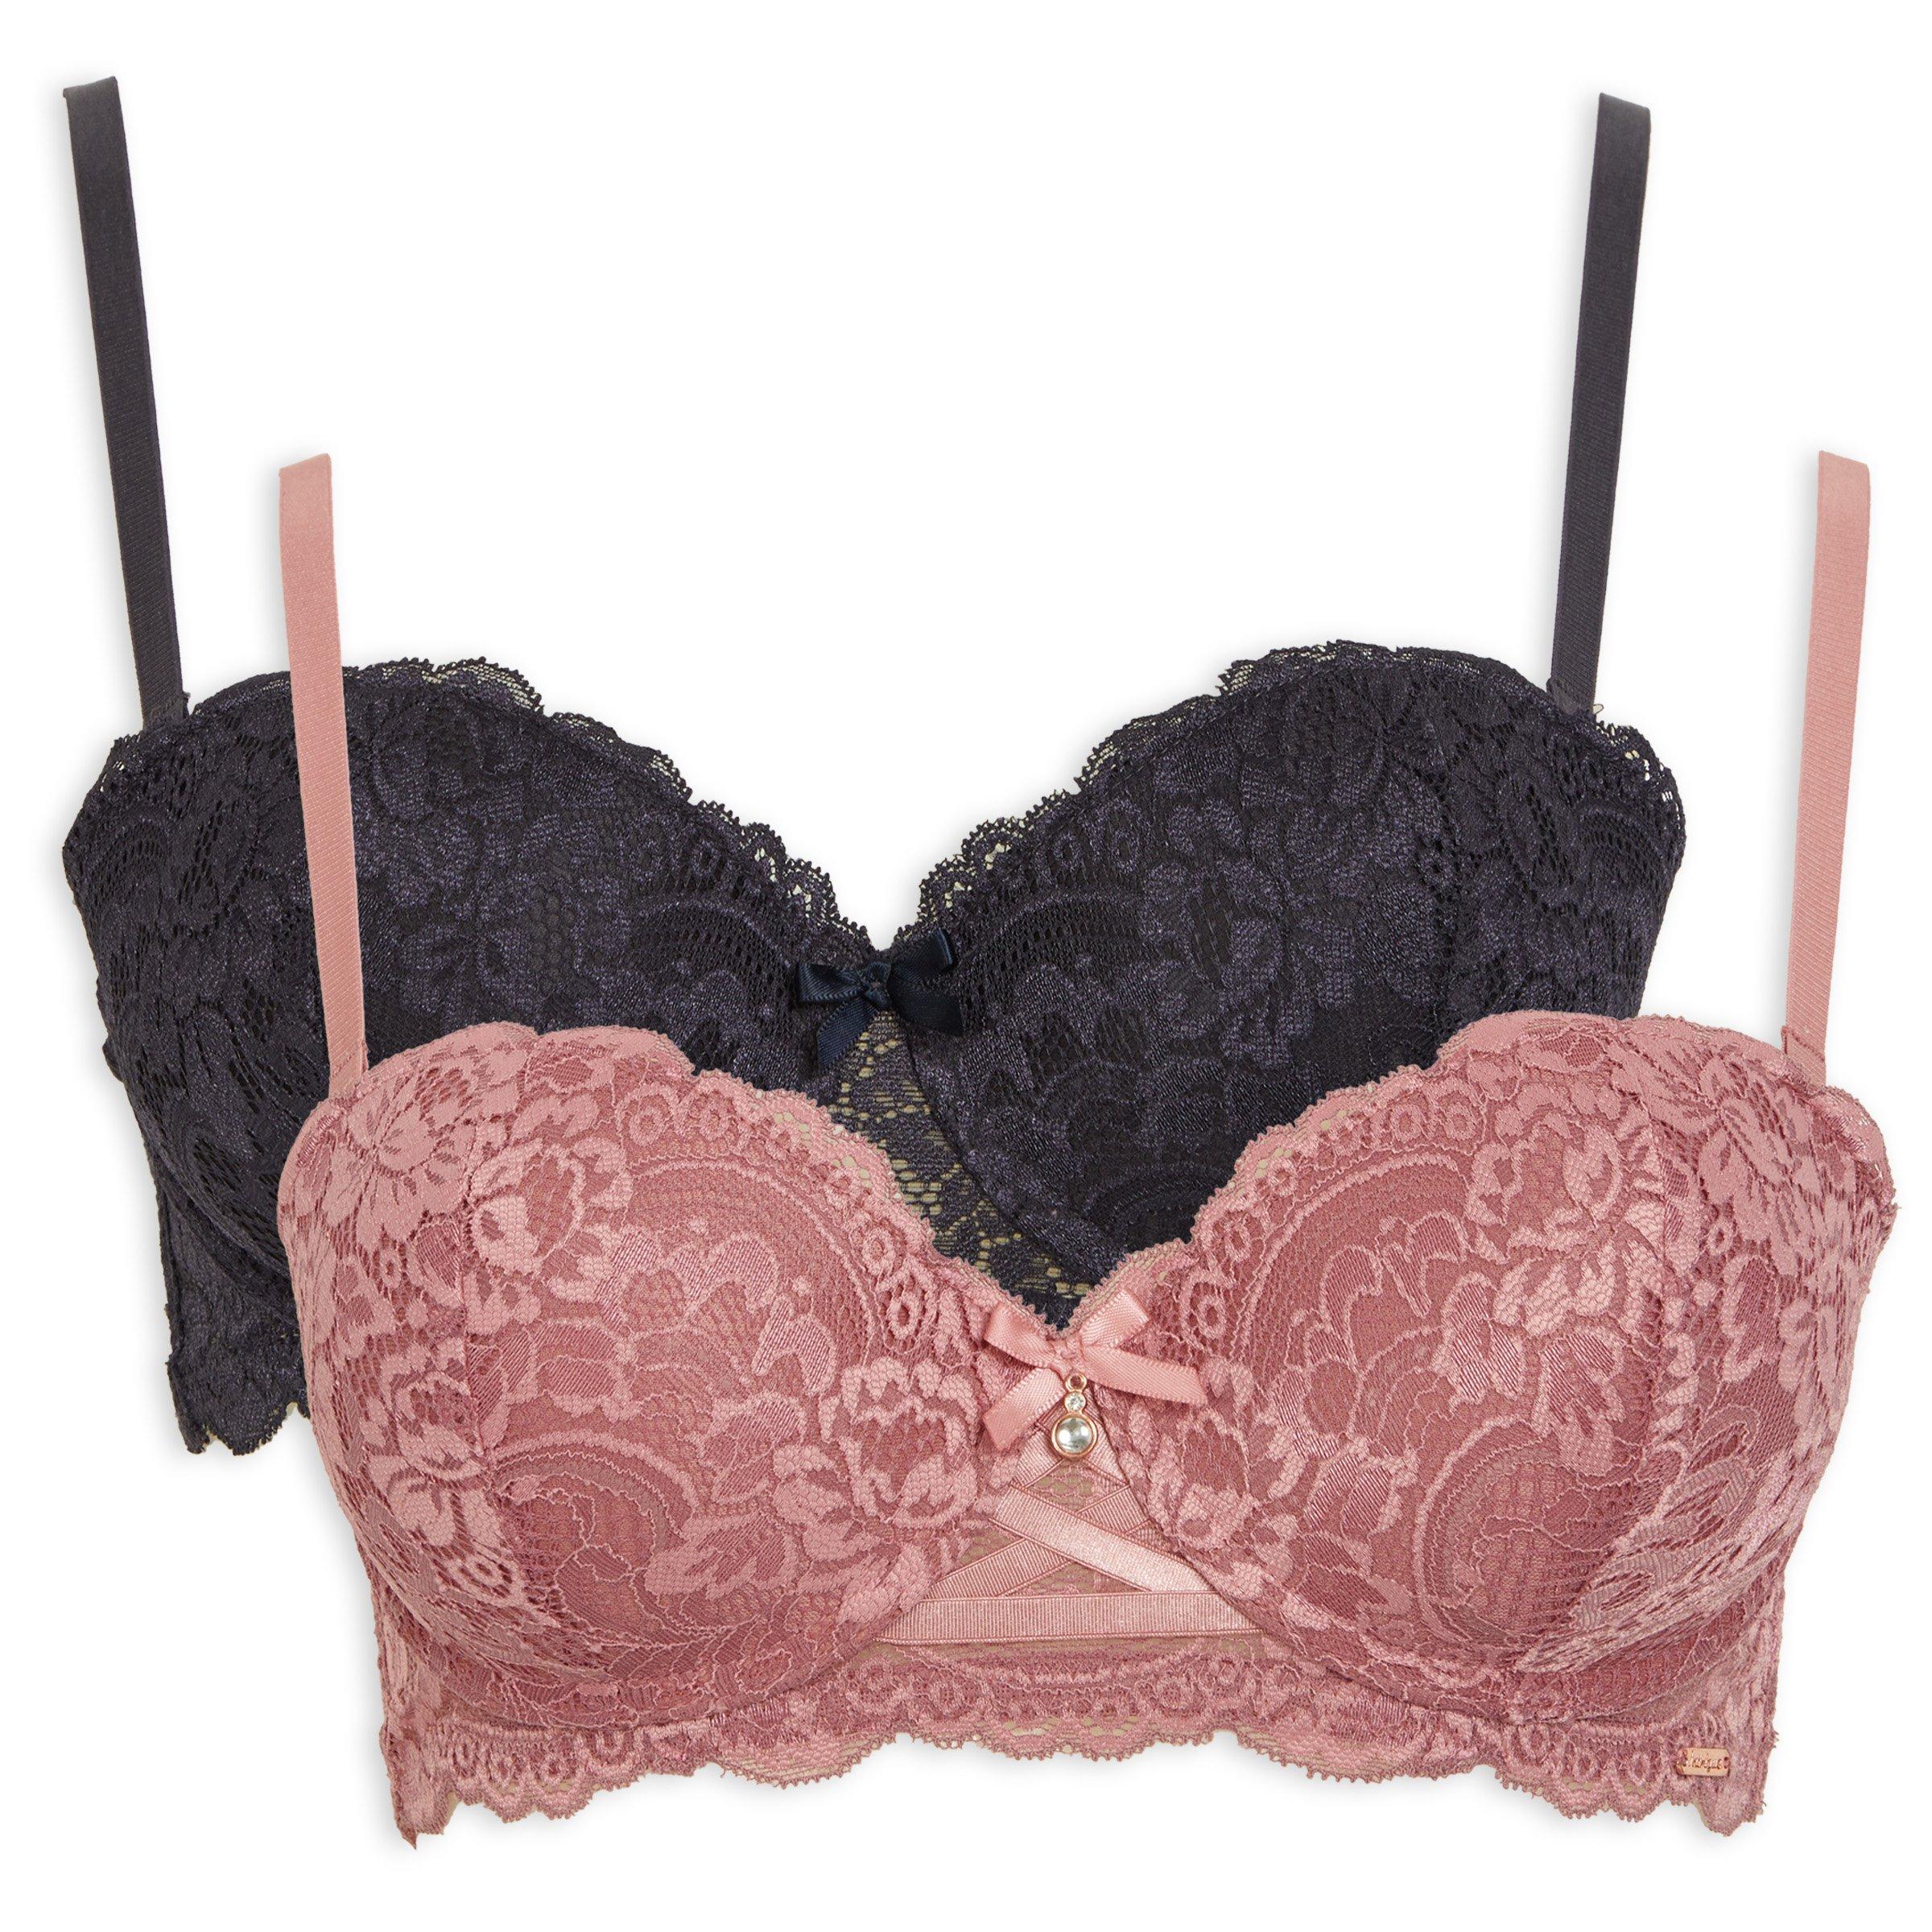 Mr Price, Bras & thong sets, lace bralette and panties